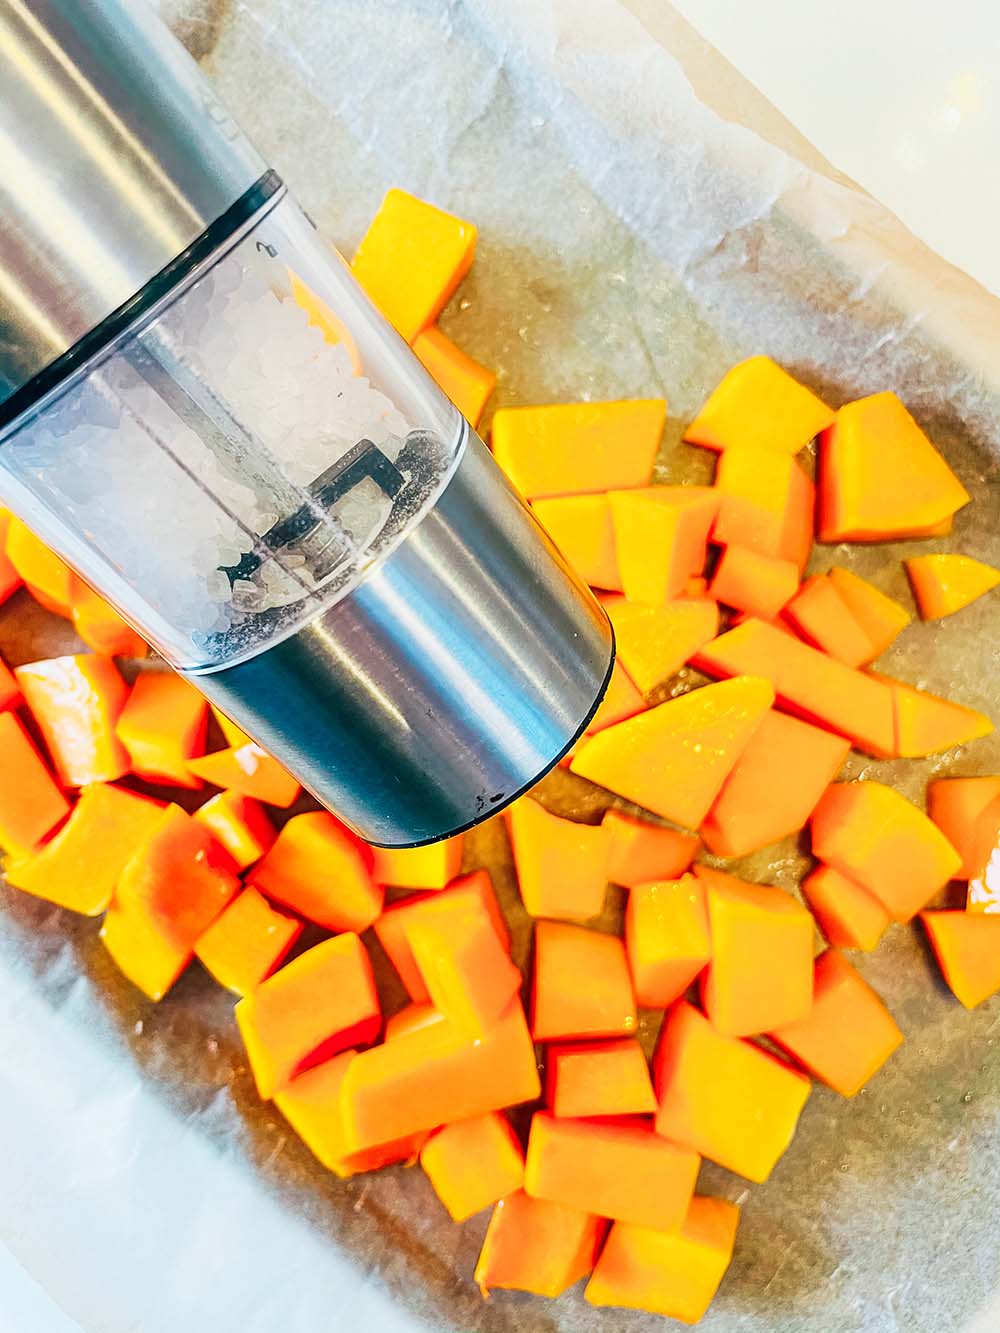 Chop the butternut sqush into chunks and toss in oil before seasonimg with salt